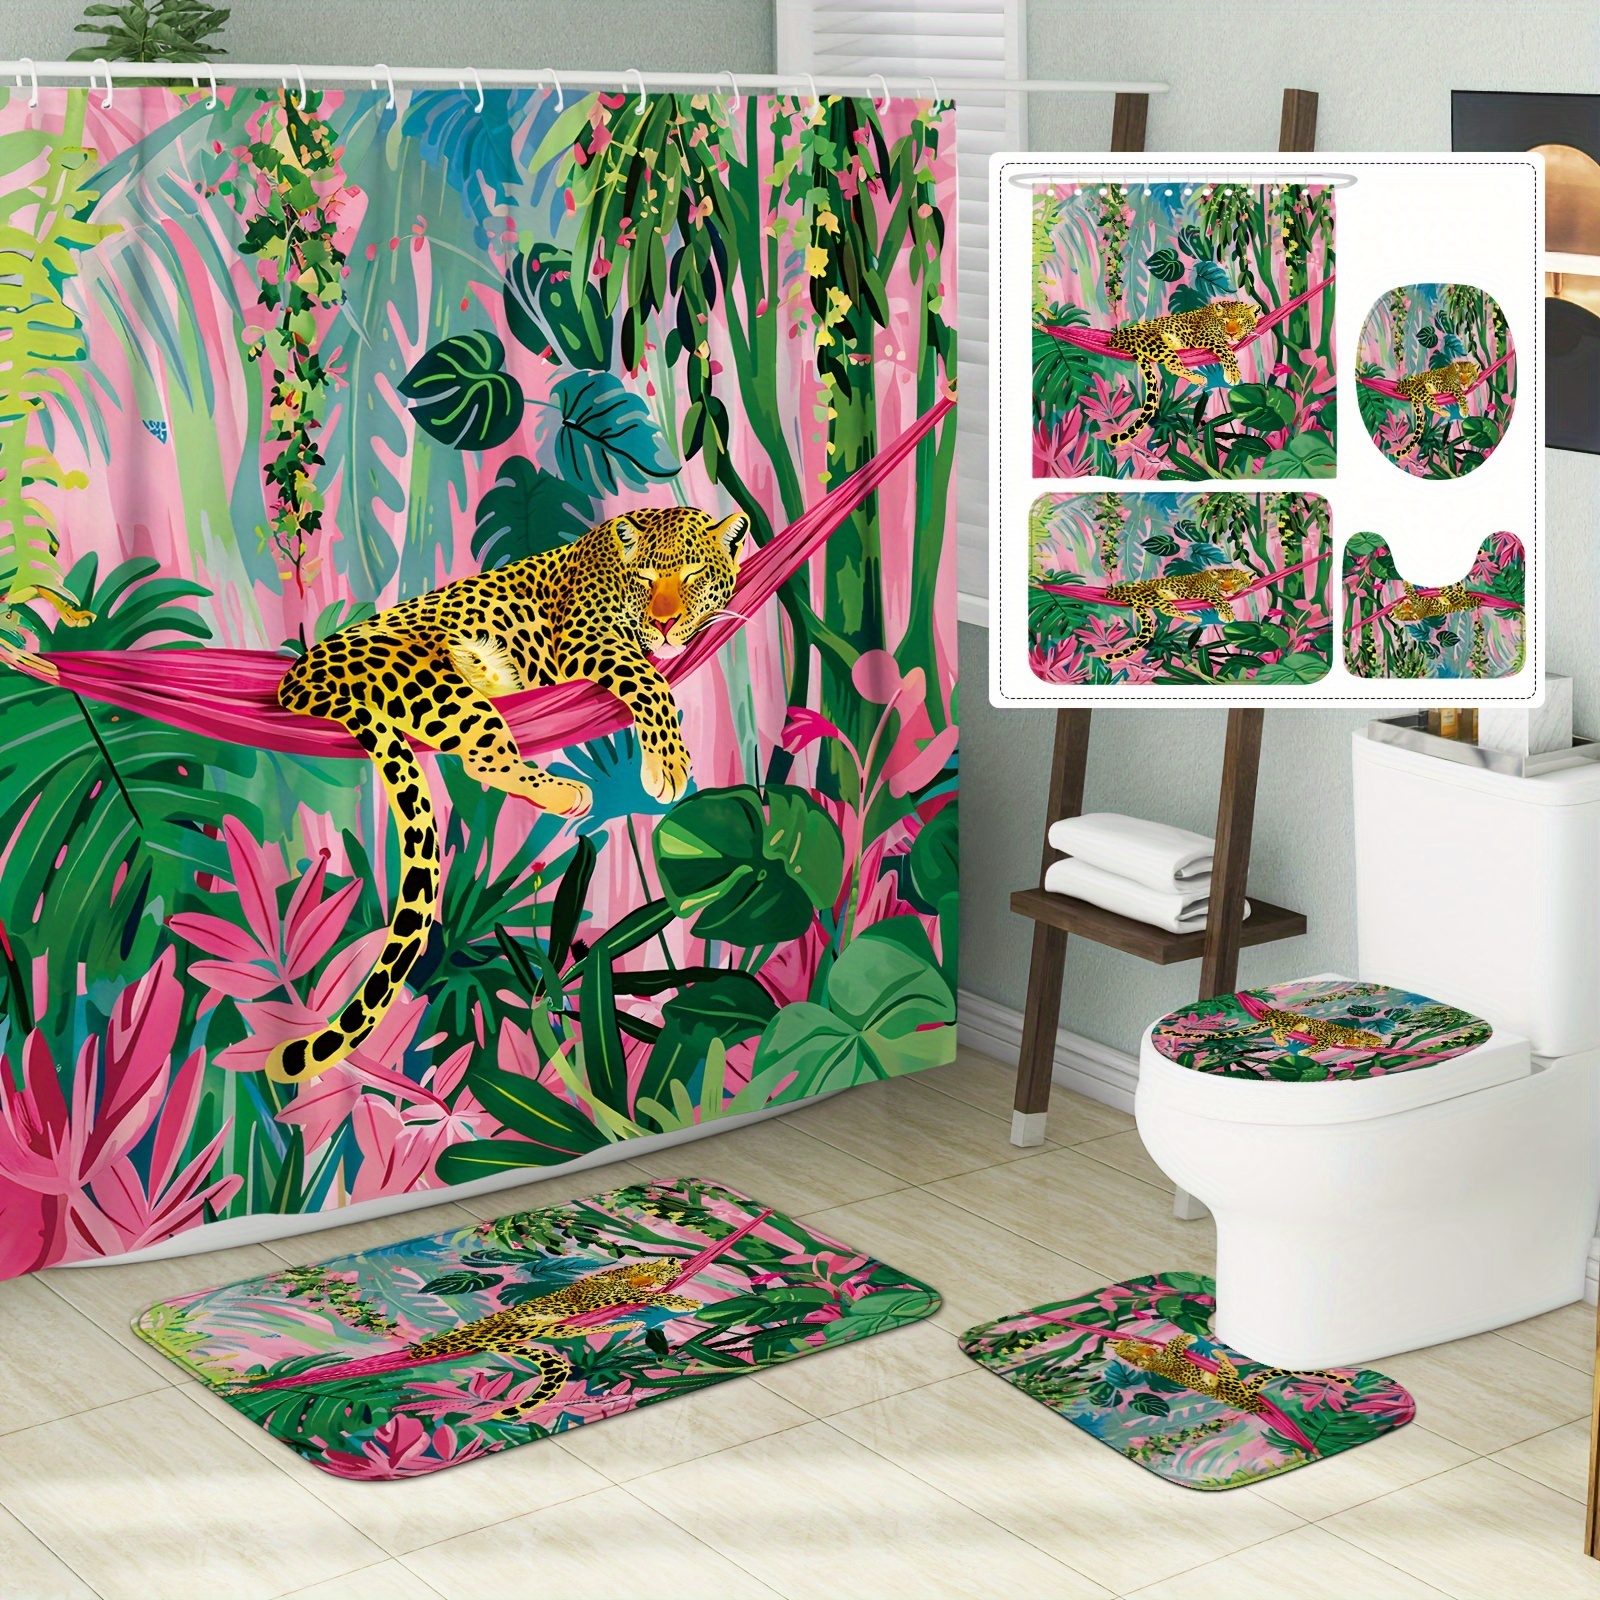 

Leopard And Tropical Plants Shower Curtain Set With Hooks And Non-slip Rugs: Waterproof, Machine Washable, And Perfect For Bathroom Decoration